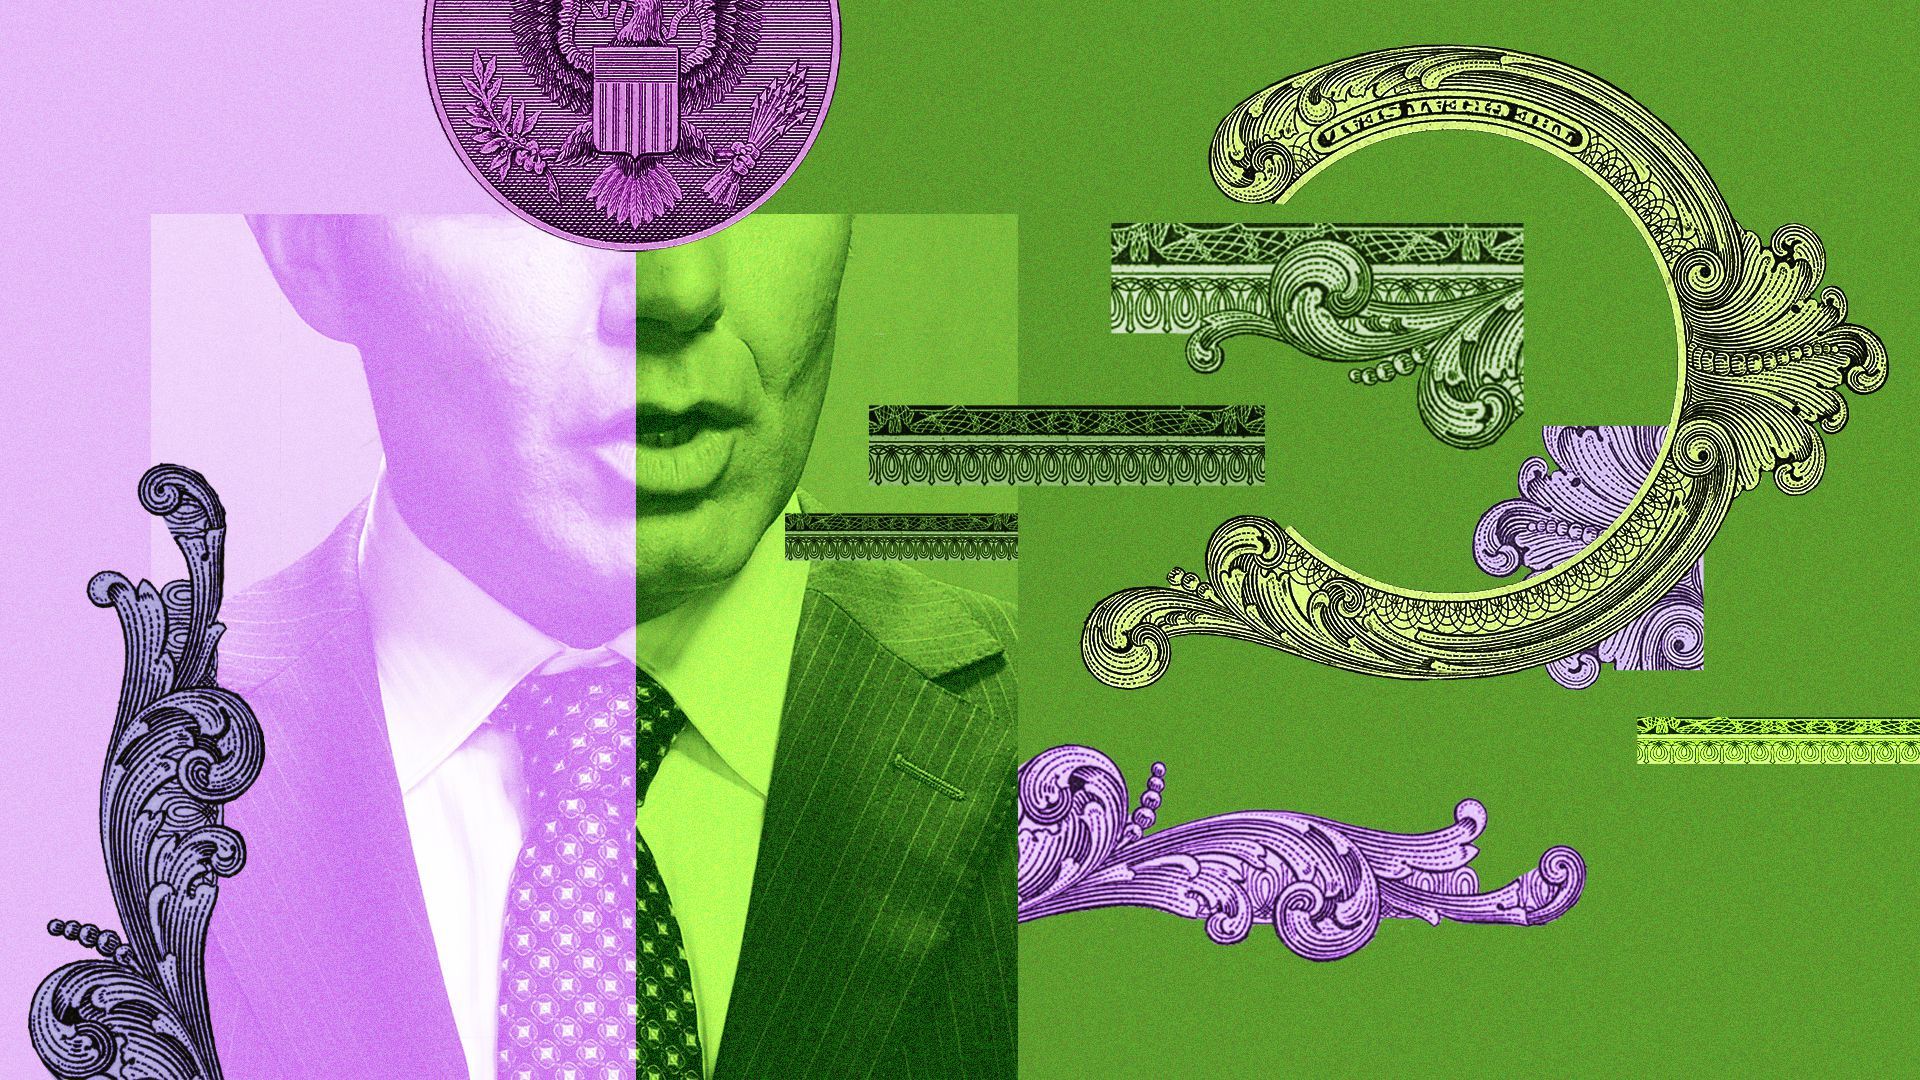 Illustration of a man in a suit speaking, with money elements overlaid on the image.